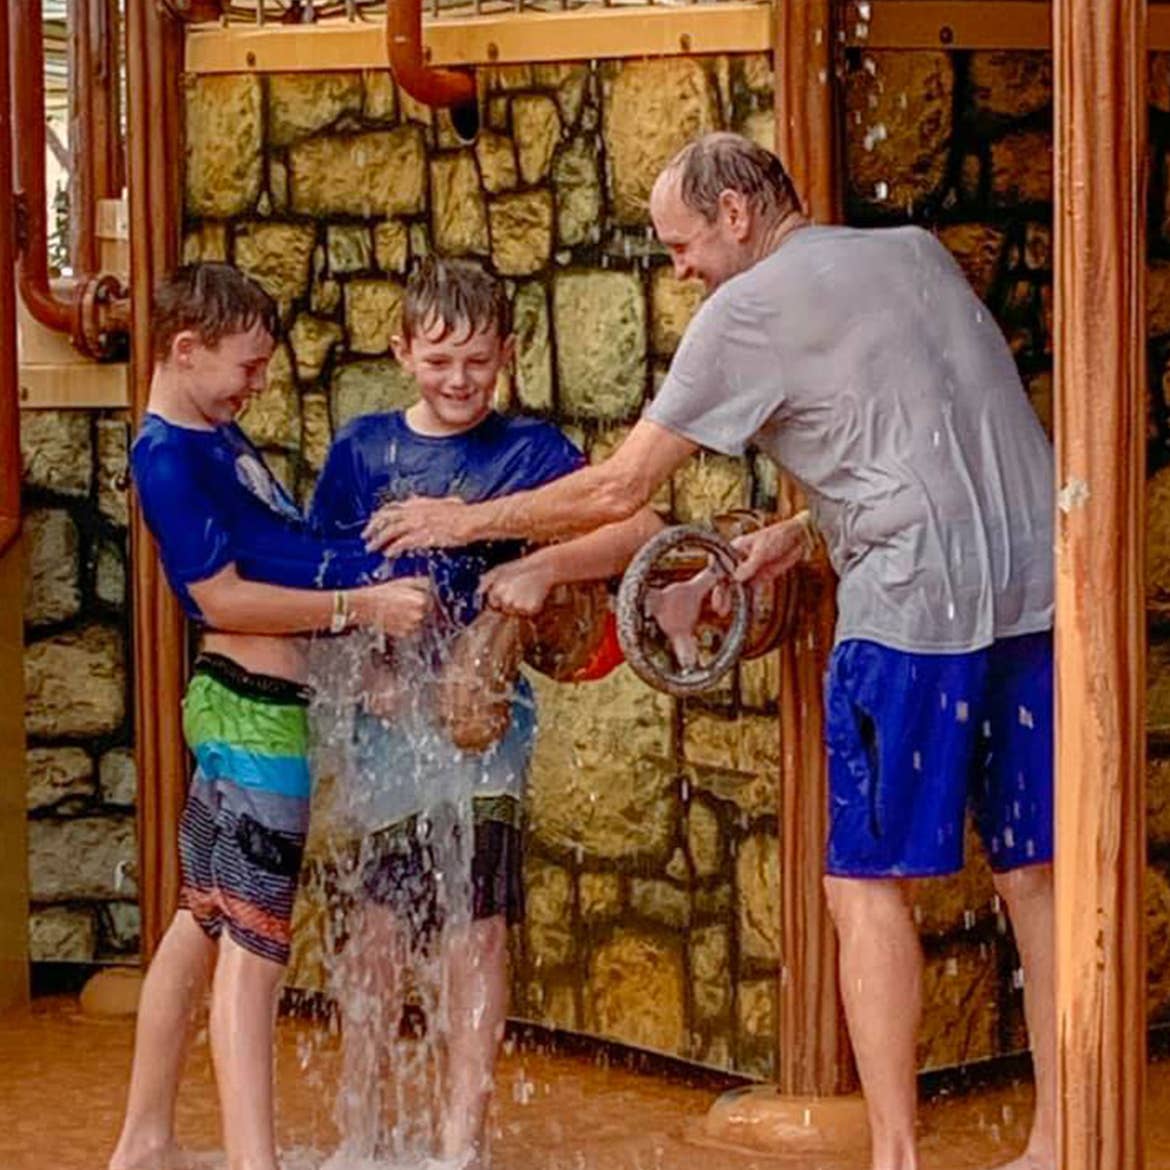 Author, Amanda Nall's father (right) and sons (left) play in the water park splash station.